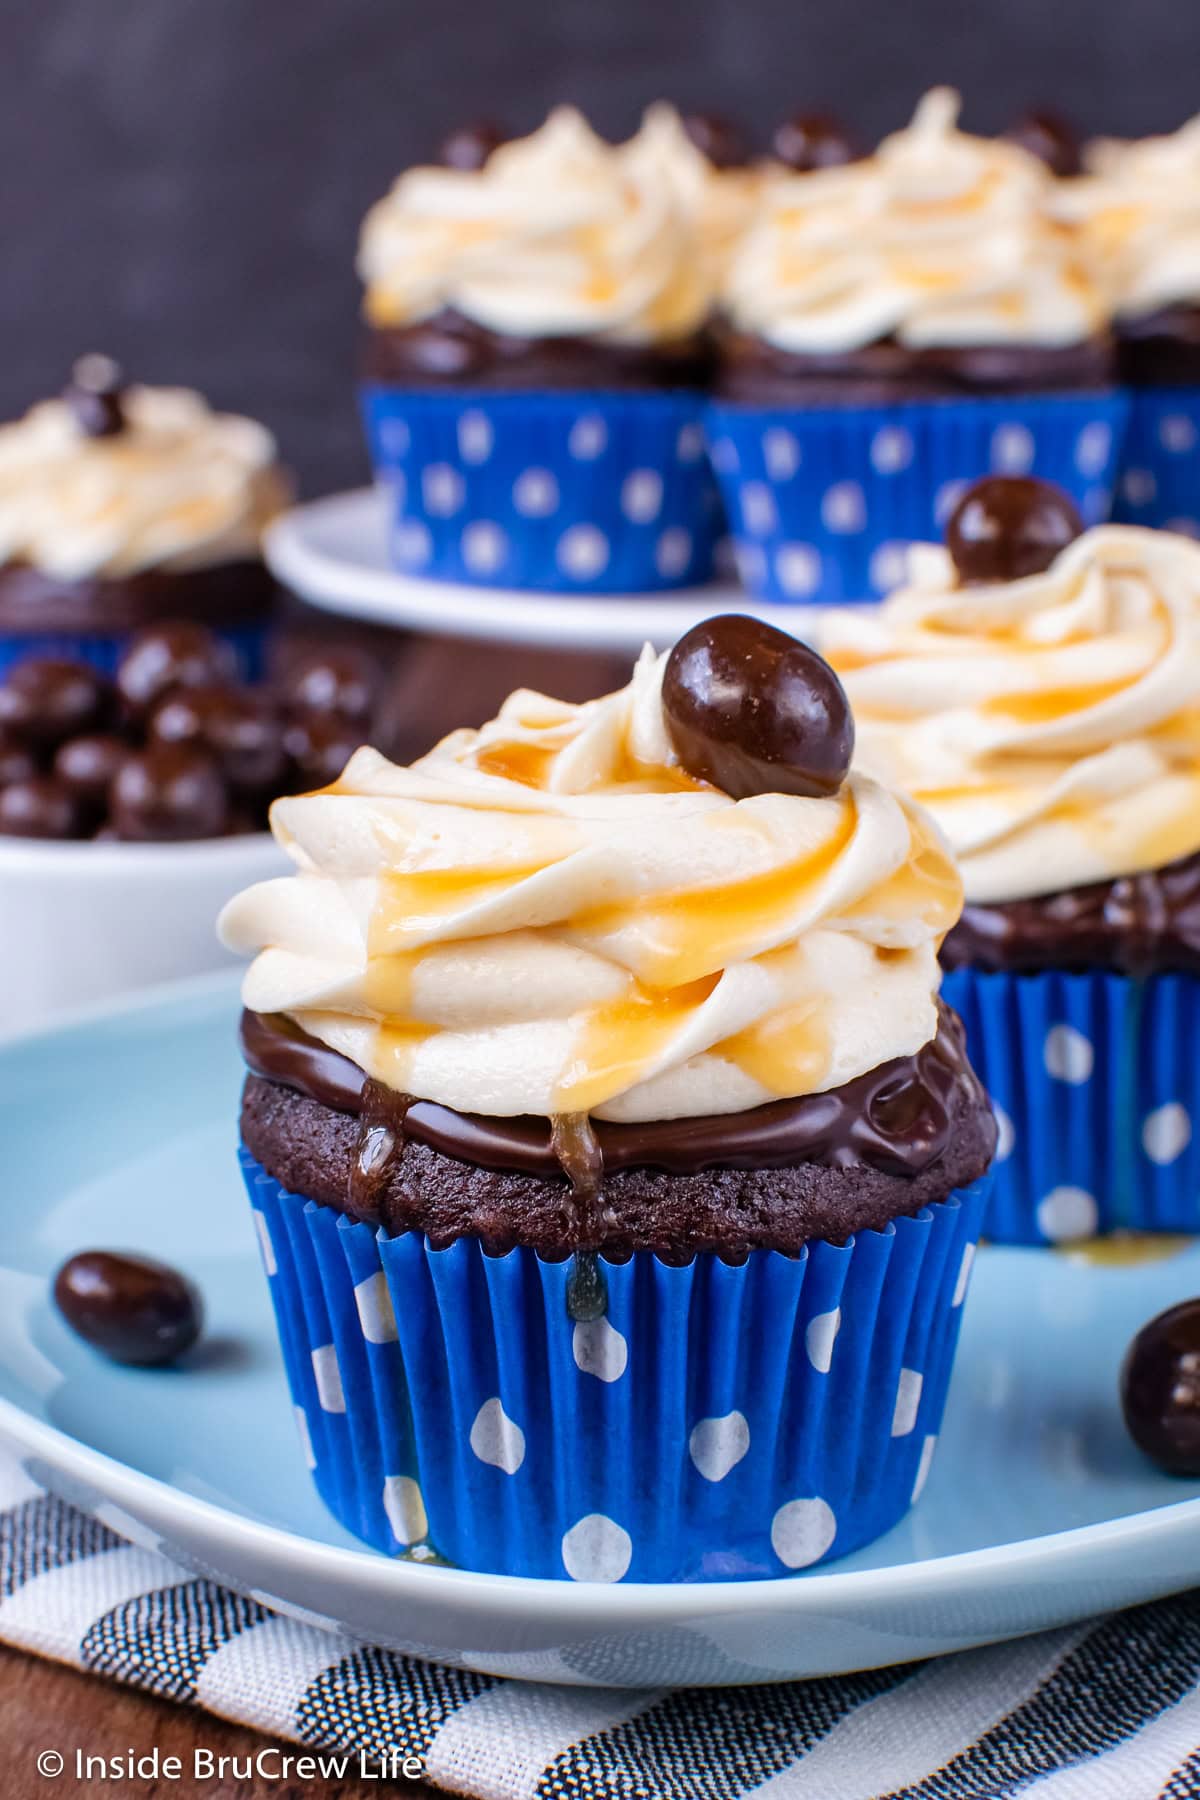 A chocolate cupcake topped with salted caramel frosting on a blue plate.